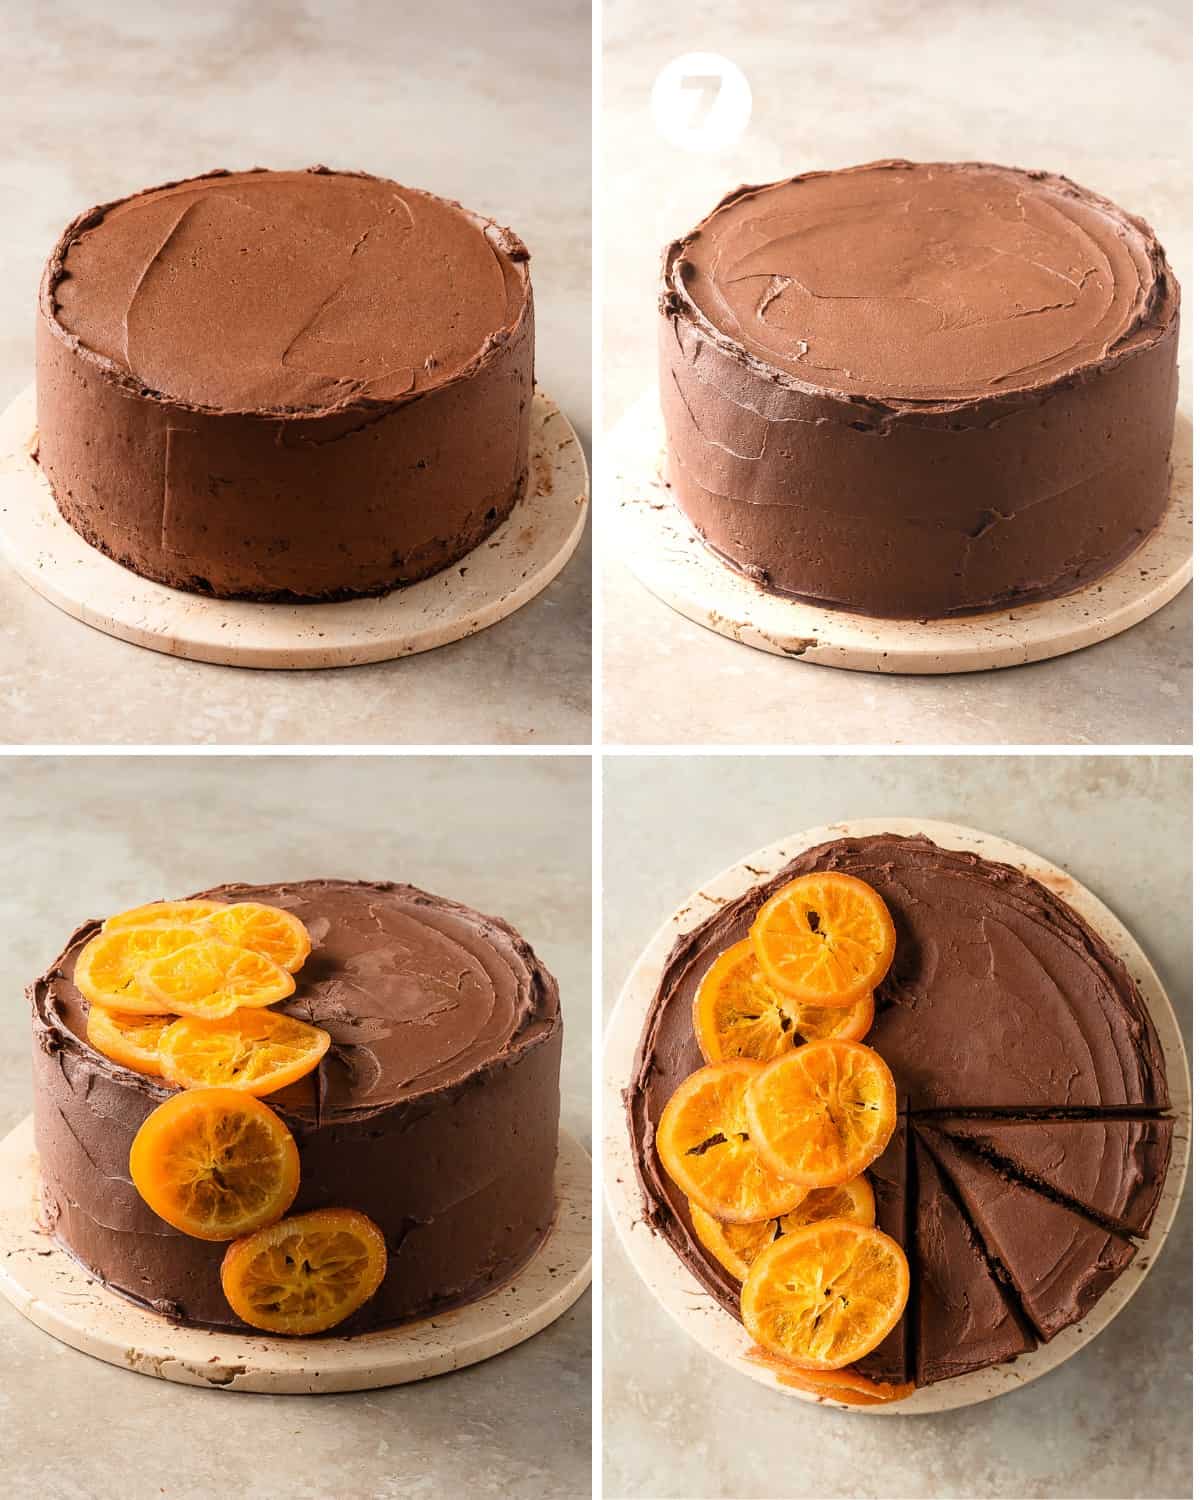 Apply the rest of the frosting to the cake. Smooth the sides with an icing knife or bench scraper. Top the cake with any leftover icing, creating swirls if you like. Add candied orange slices to the top and sides for a decorative touch. Return to the fridge to chill at least an additional 30 minutes, slice and enjoy.